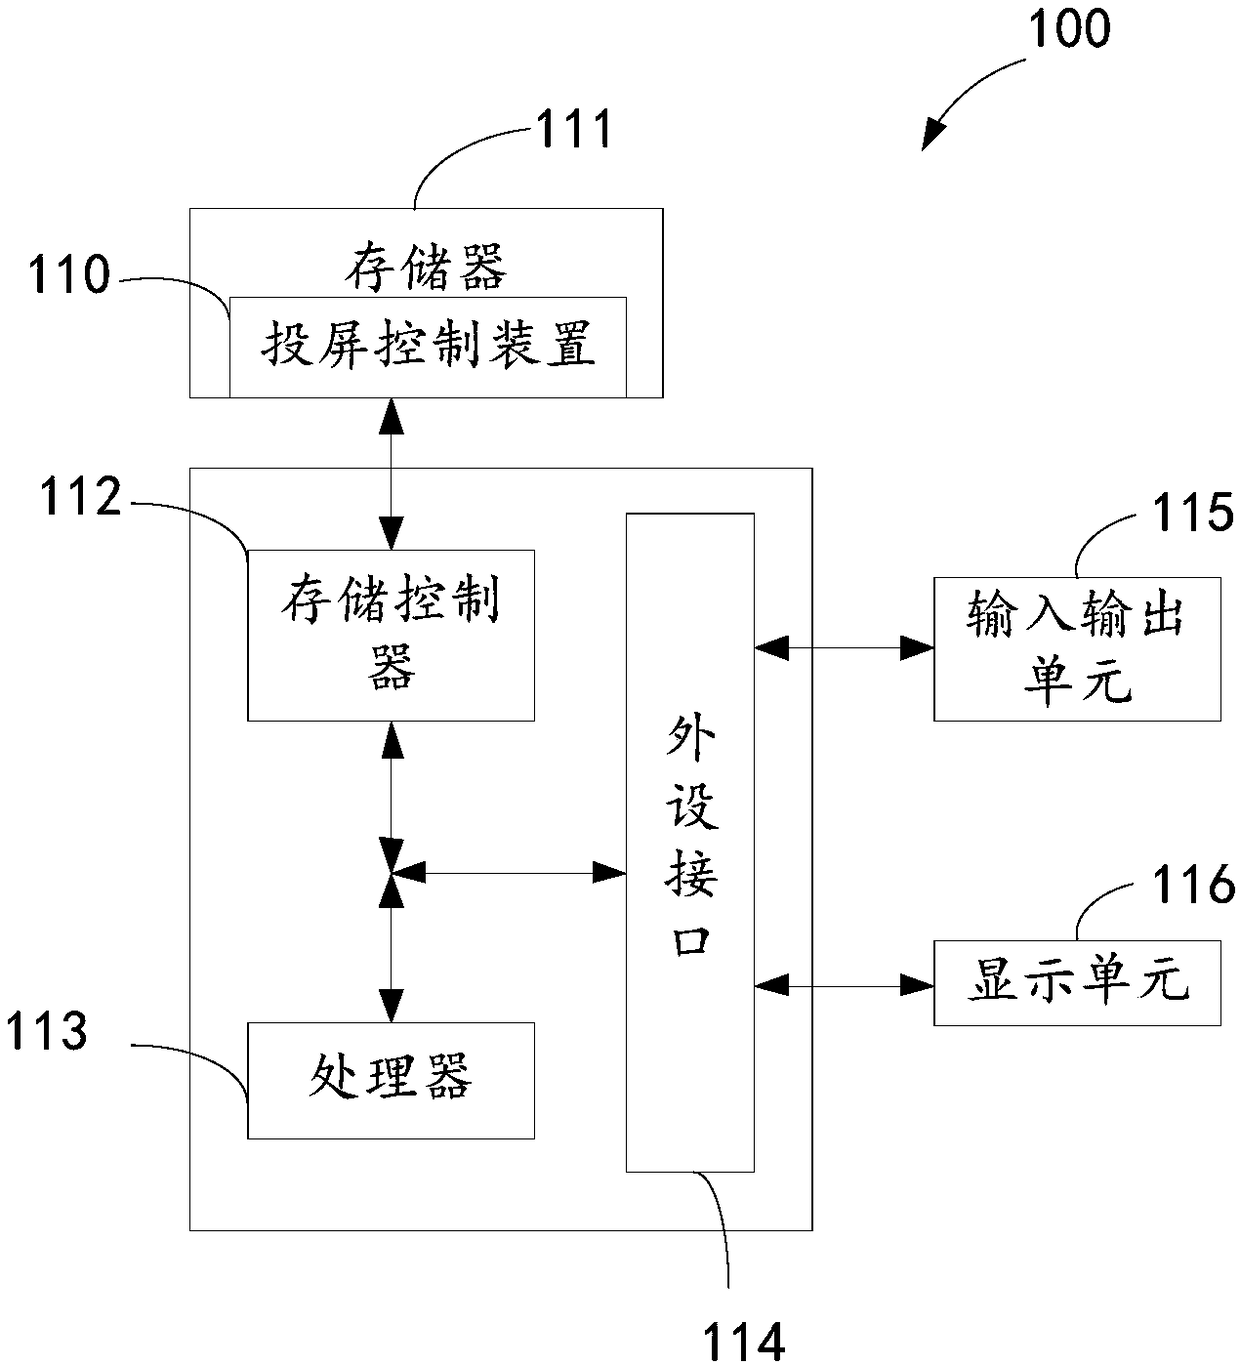 Projection screen control method and device, electronic terminal and readable storage medium